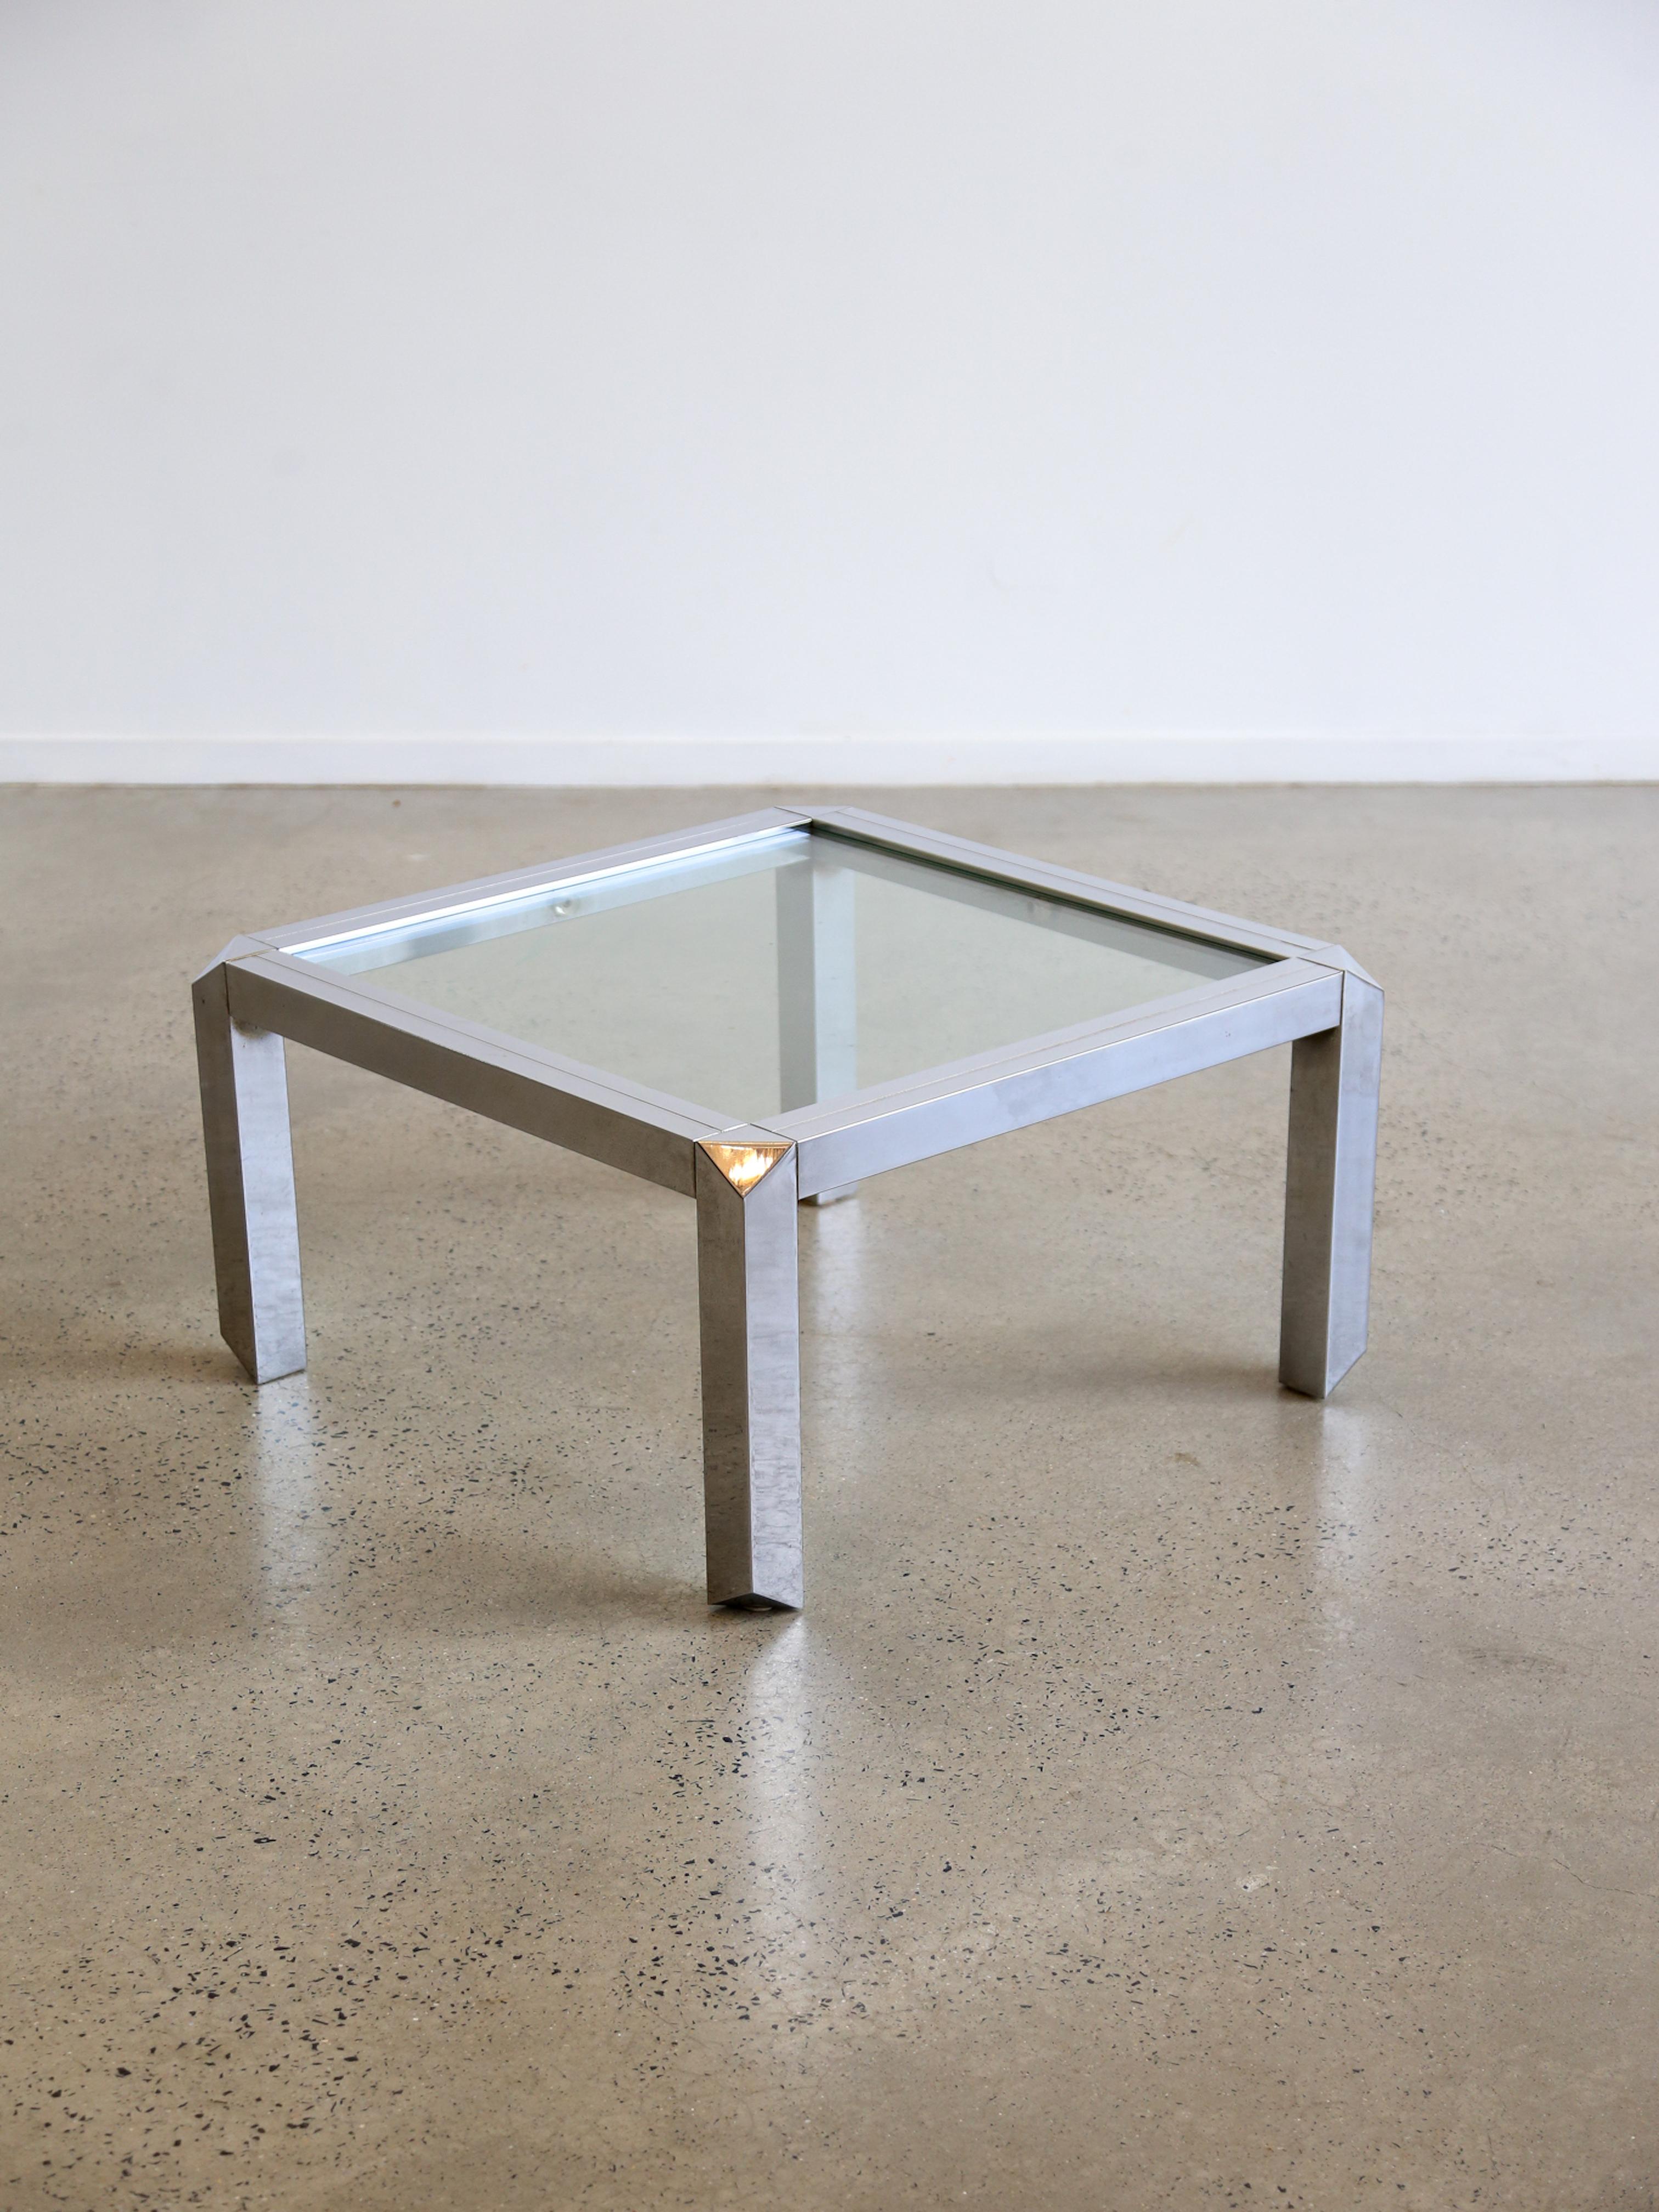 Mid-century modern design often incorporated geometric shapes, and a square coffee table is a good example of this. The square shape gives the table a symmetrical and balanced look.

The use of chrome or polished metal frames is a common feature in